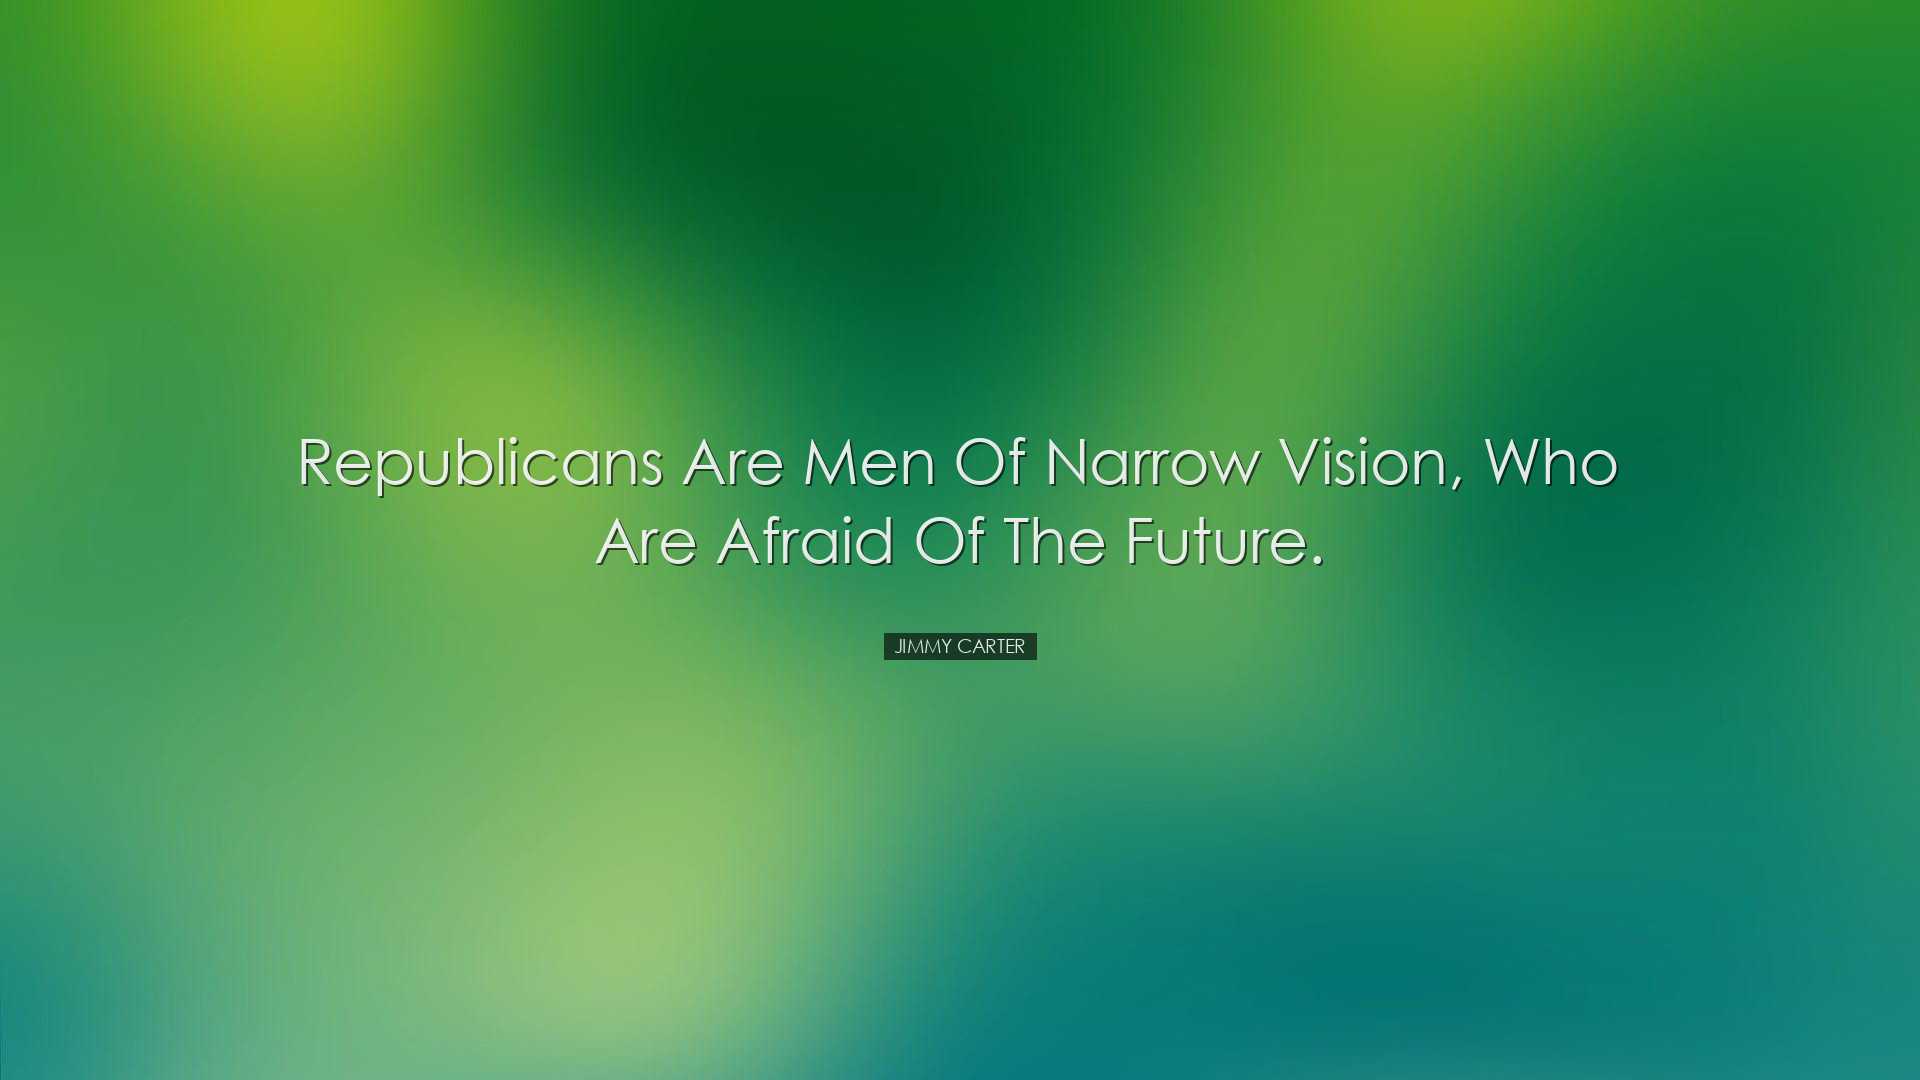 Republicans are men of narrow vision, who are afraid of the future